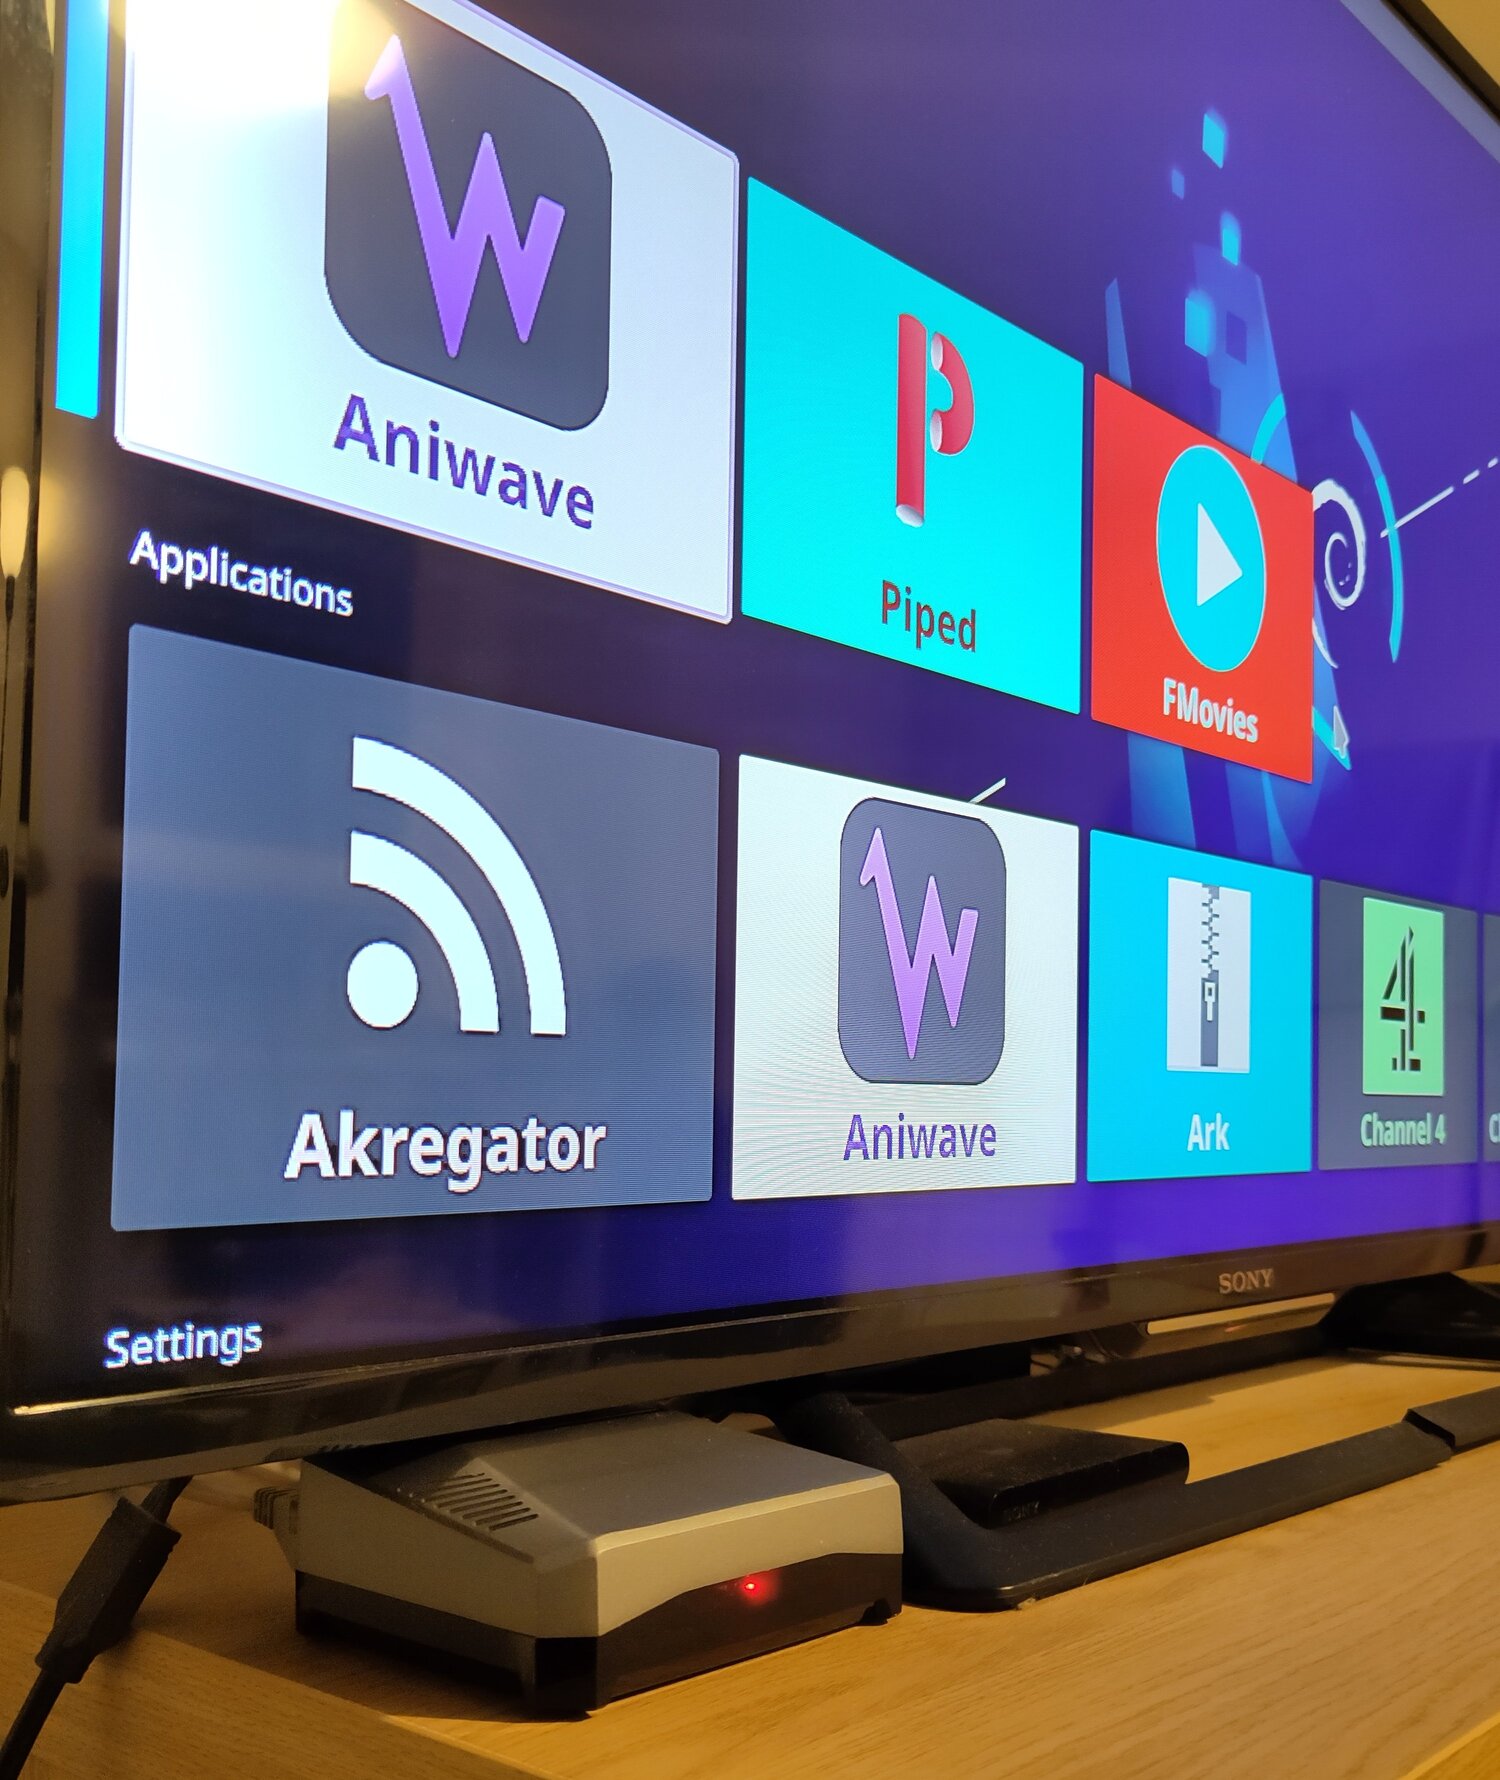 A Rspberry Pi 4b in an Argon One M.2. Sata case, powered
        on and plugged into a TV that is on the KDE Plasma Bigscreen
        home screen, with a Debian logo wallpaper.